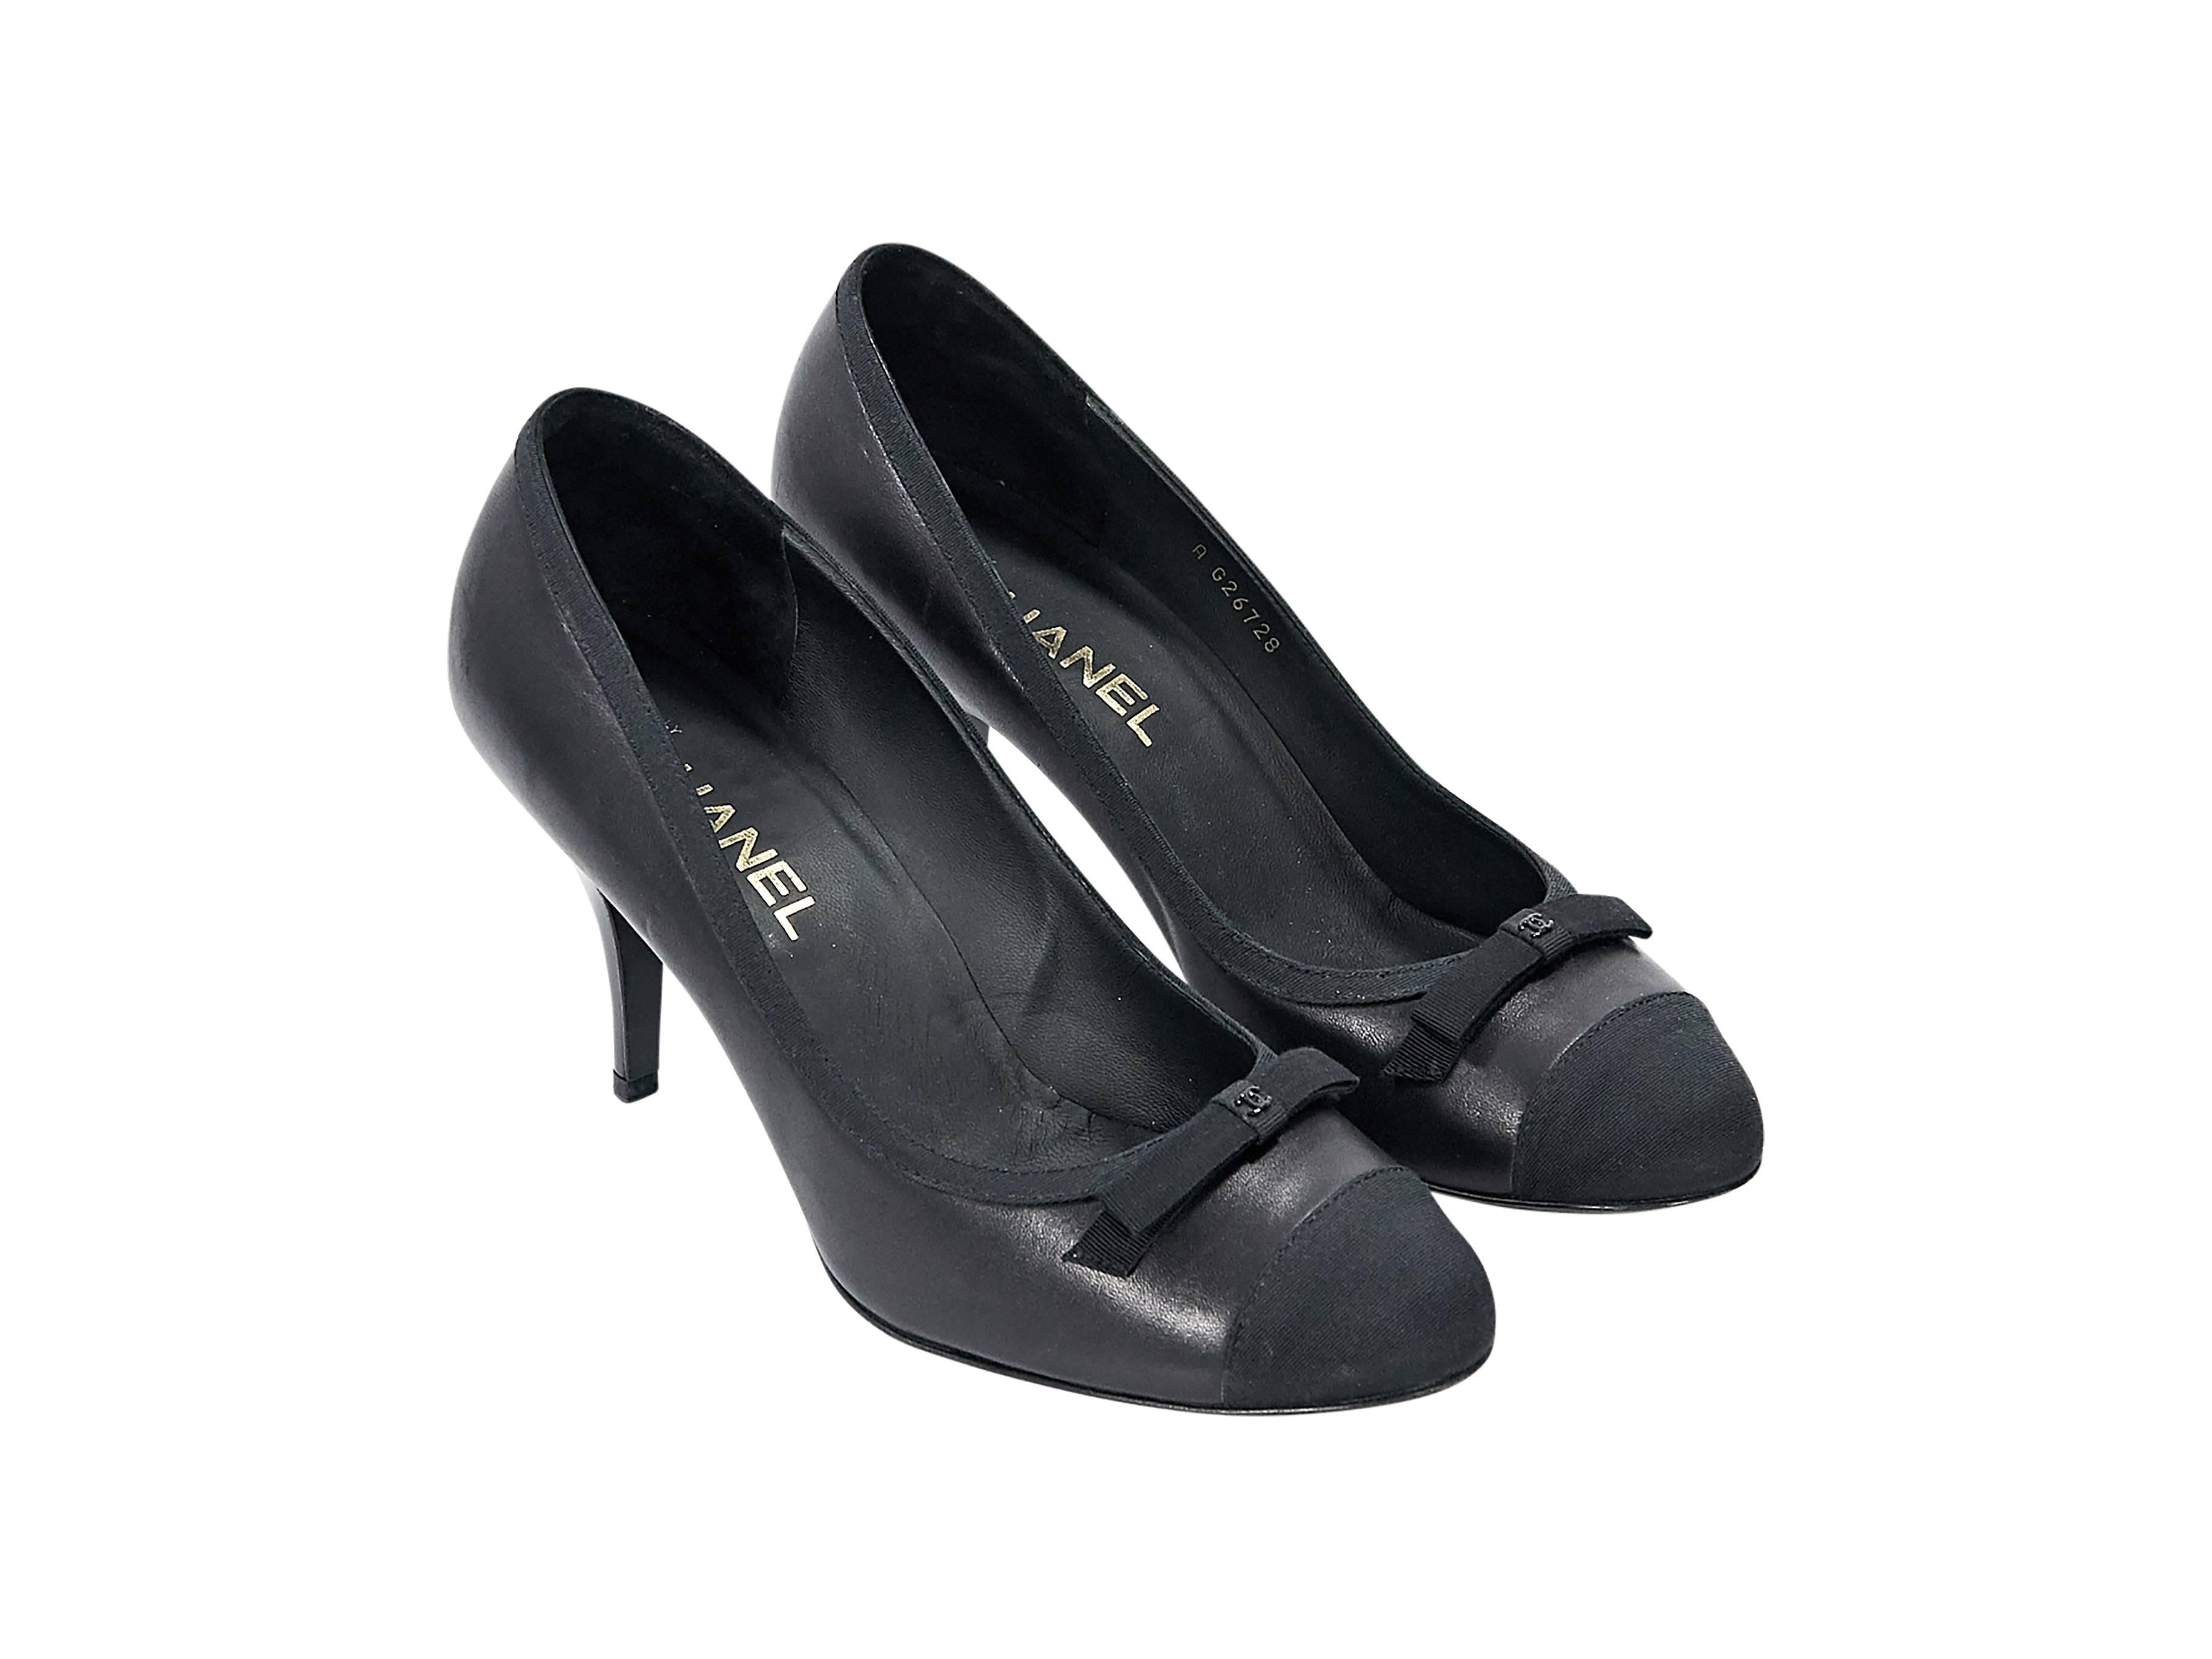 Product details: Black leather pumps by Chanel. Bow accents vamp. Round cap toe. Notched heel. Slip-on style. 
Condition: Pre-owned. Very good.

Est. Retail $ 1,800.00